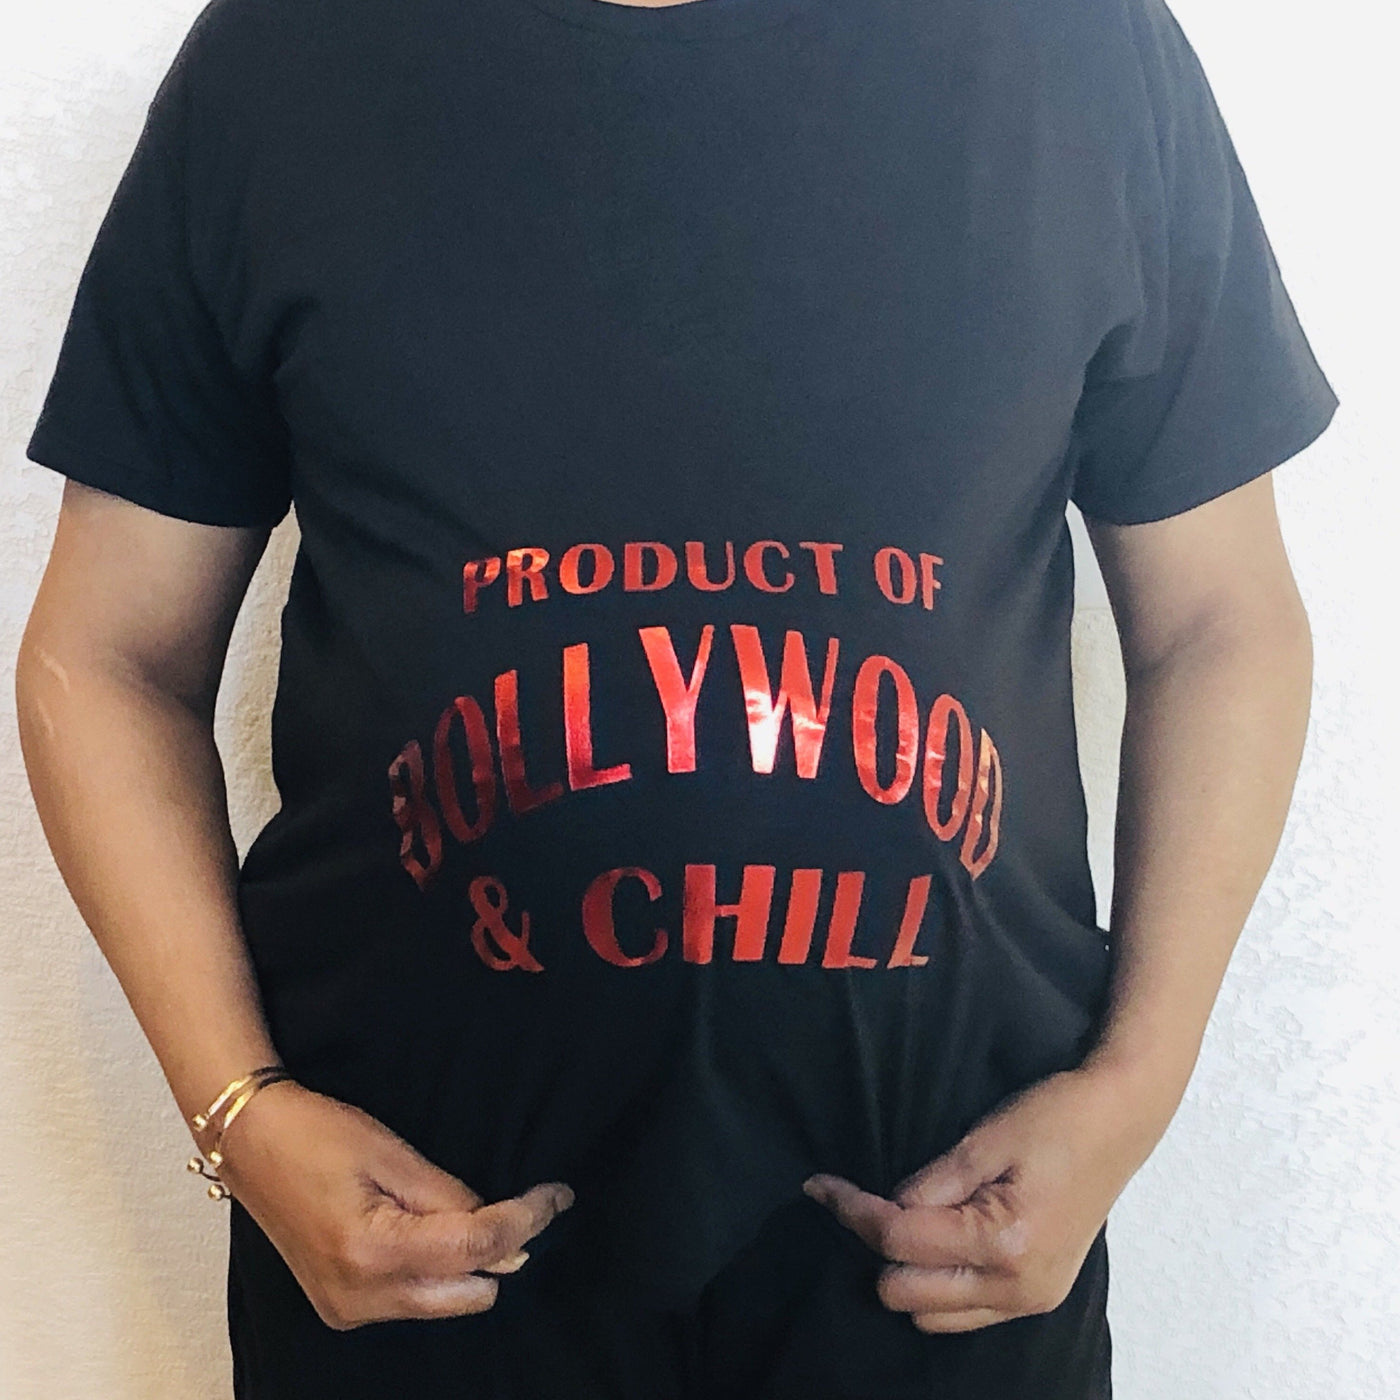 Bollywood and Chill Pregnancy Shirt